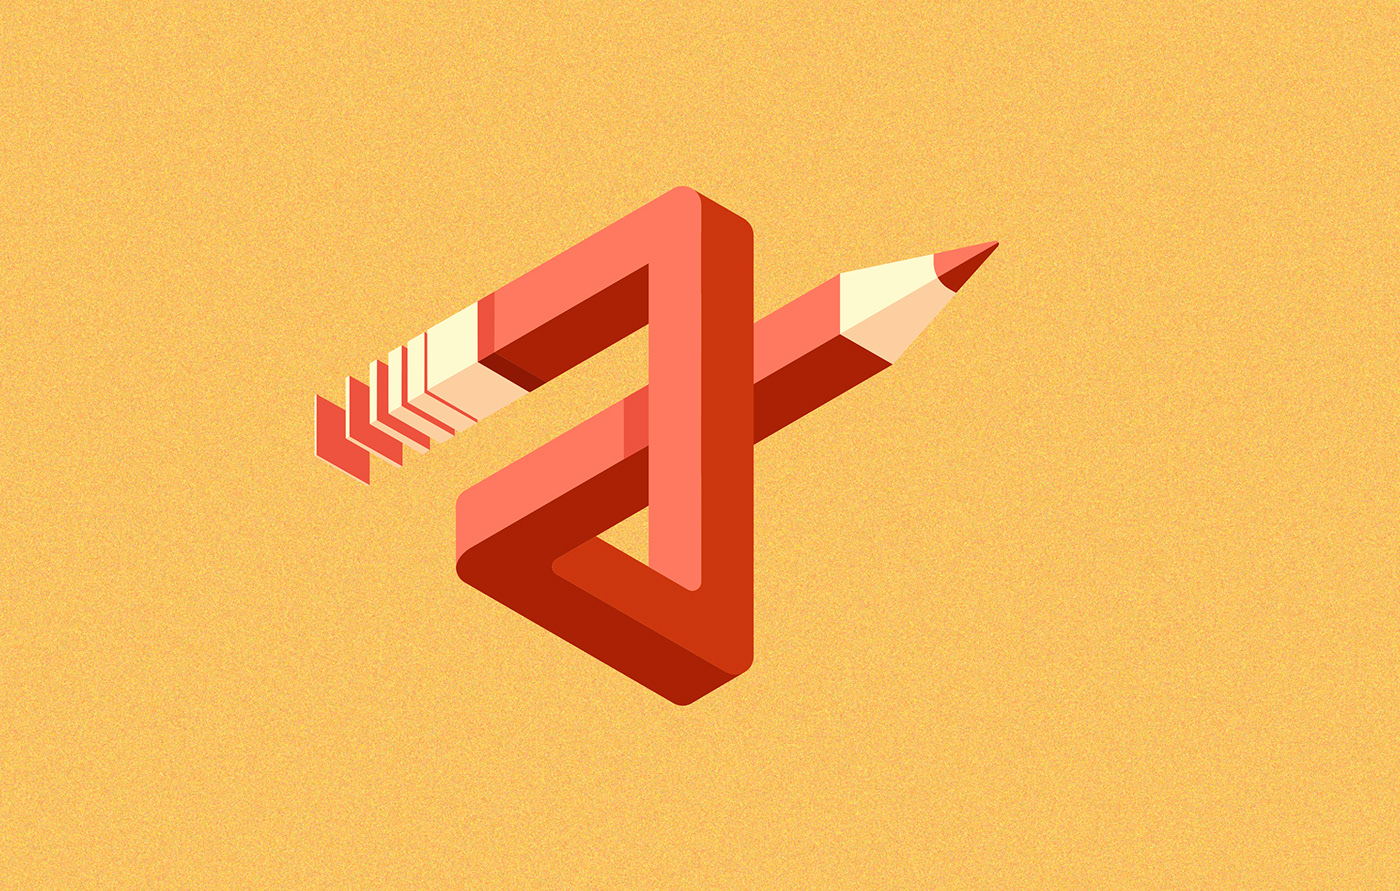 impossible perspective - pencil - isometric perspective - vector illustration